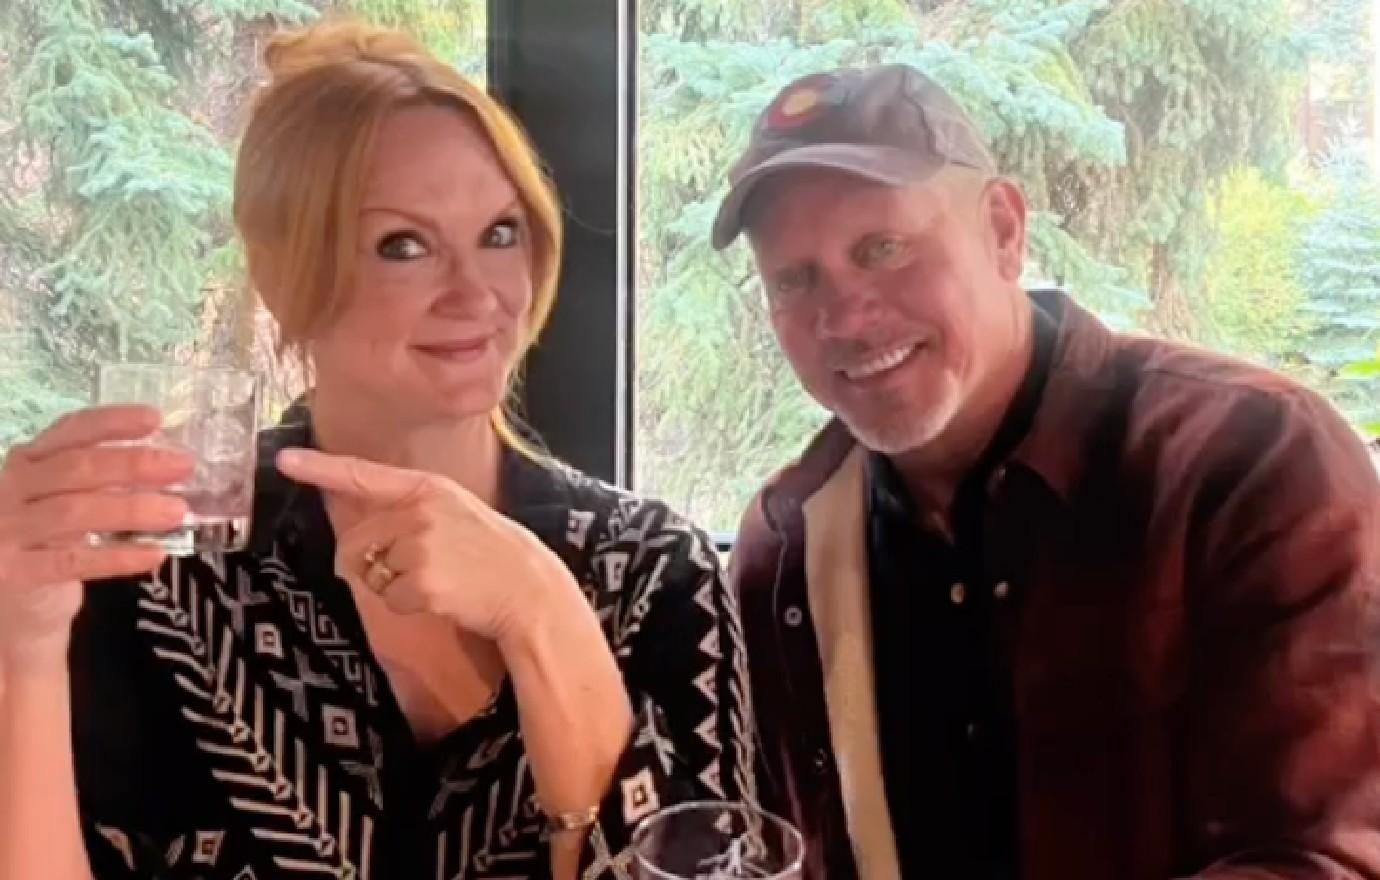 Ree Drummond Shares a Heartwarming Tribute to Horses